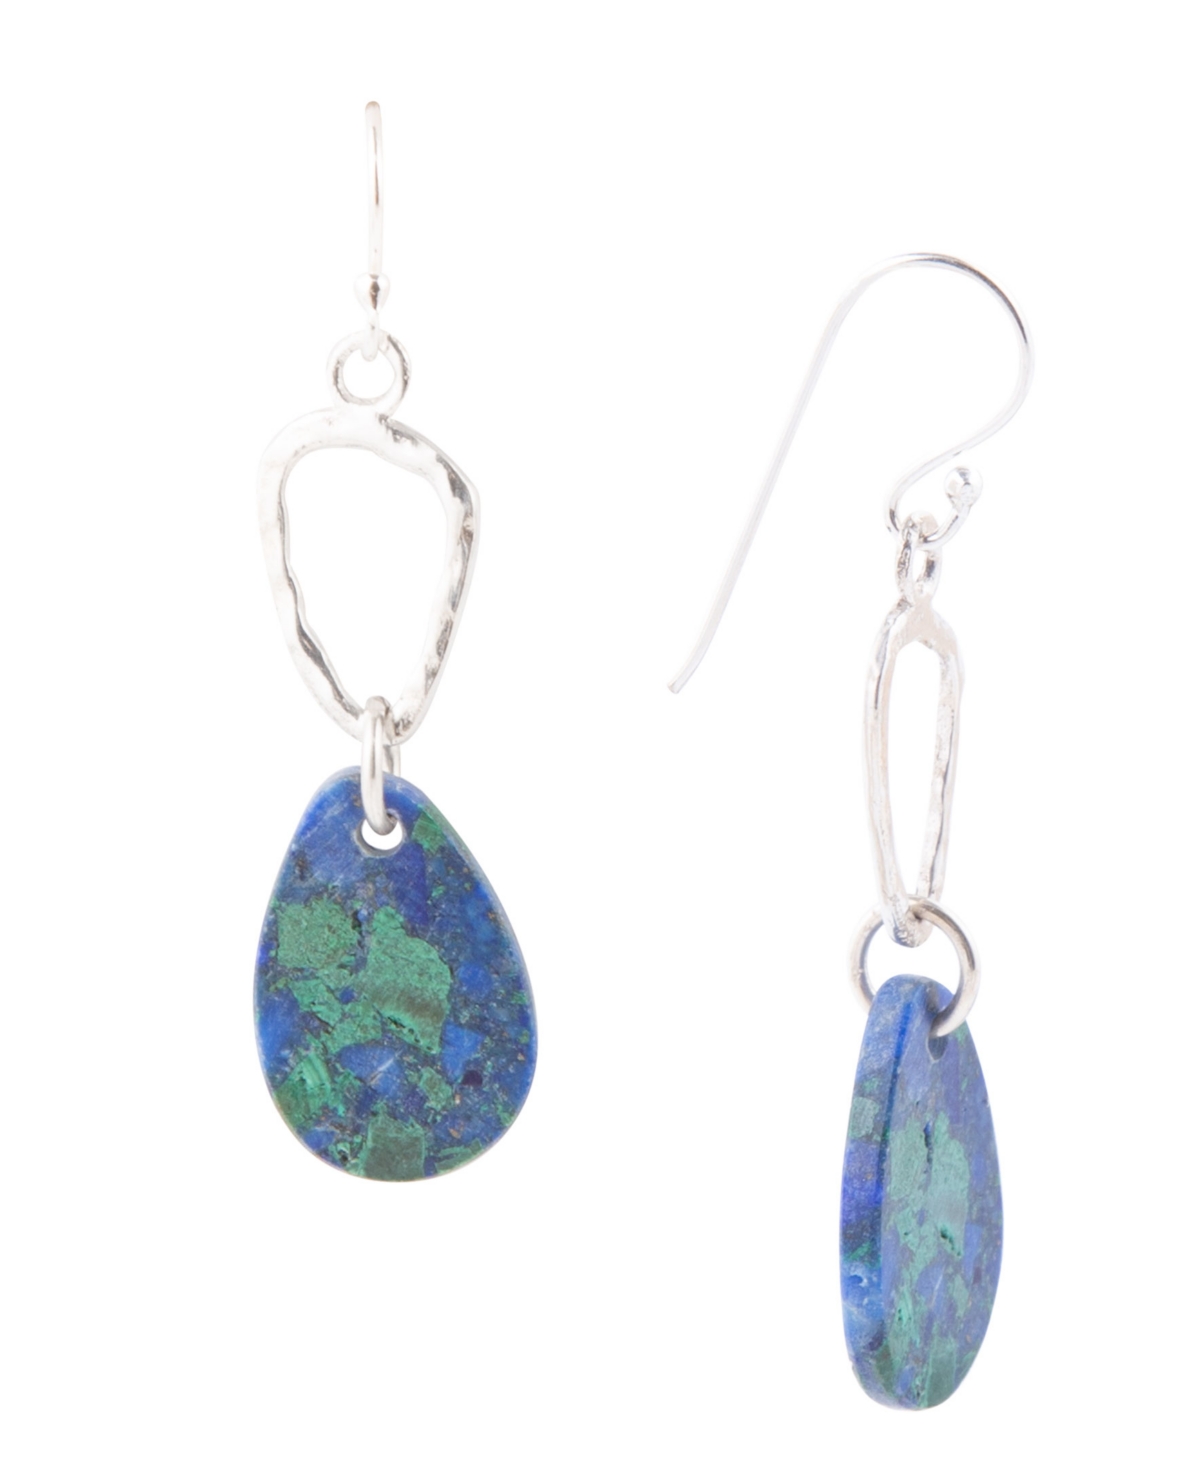 Rose Sterling Silver And Genuine Azurite Drop Earrings